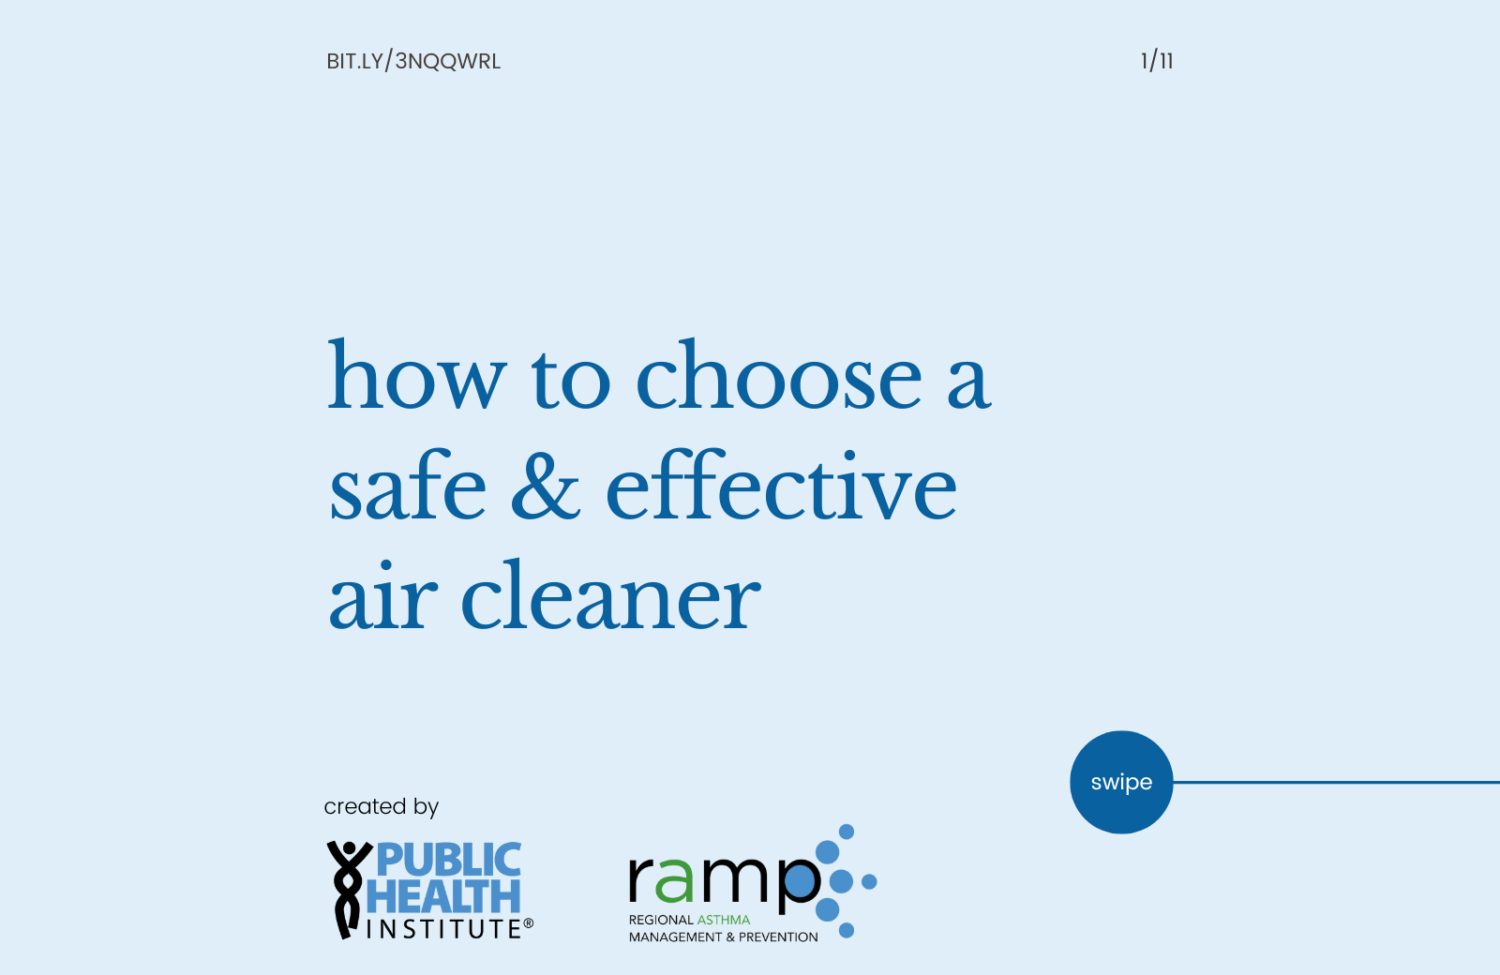 how to choose a safe & effective air cleaner